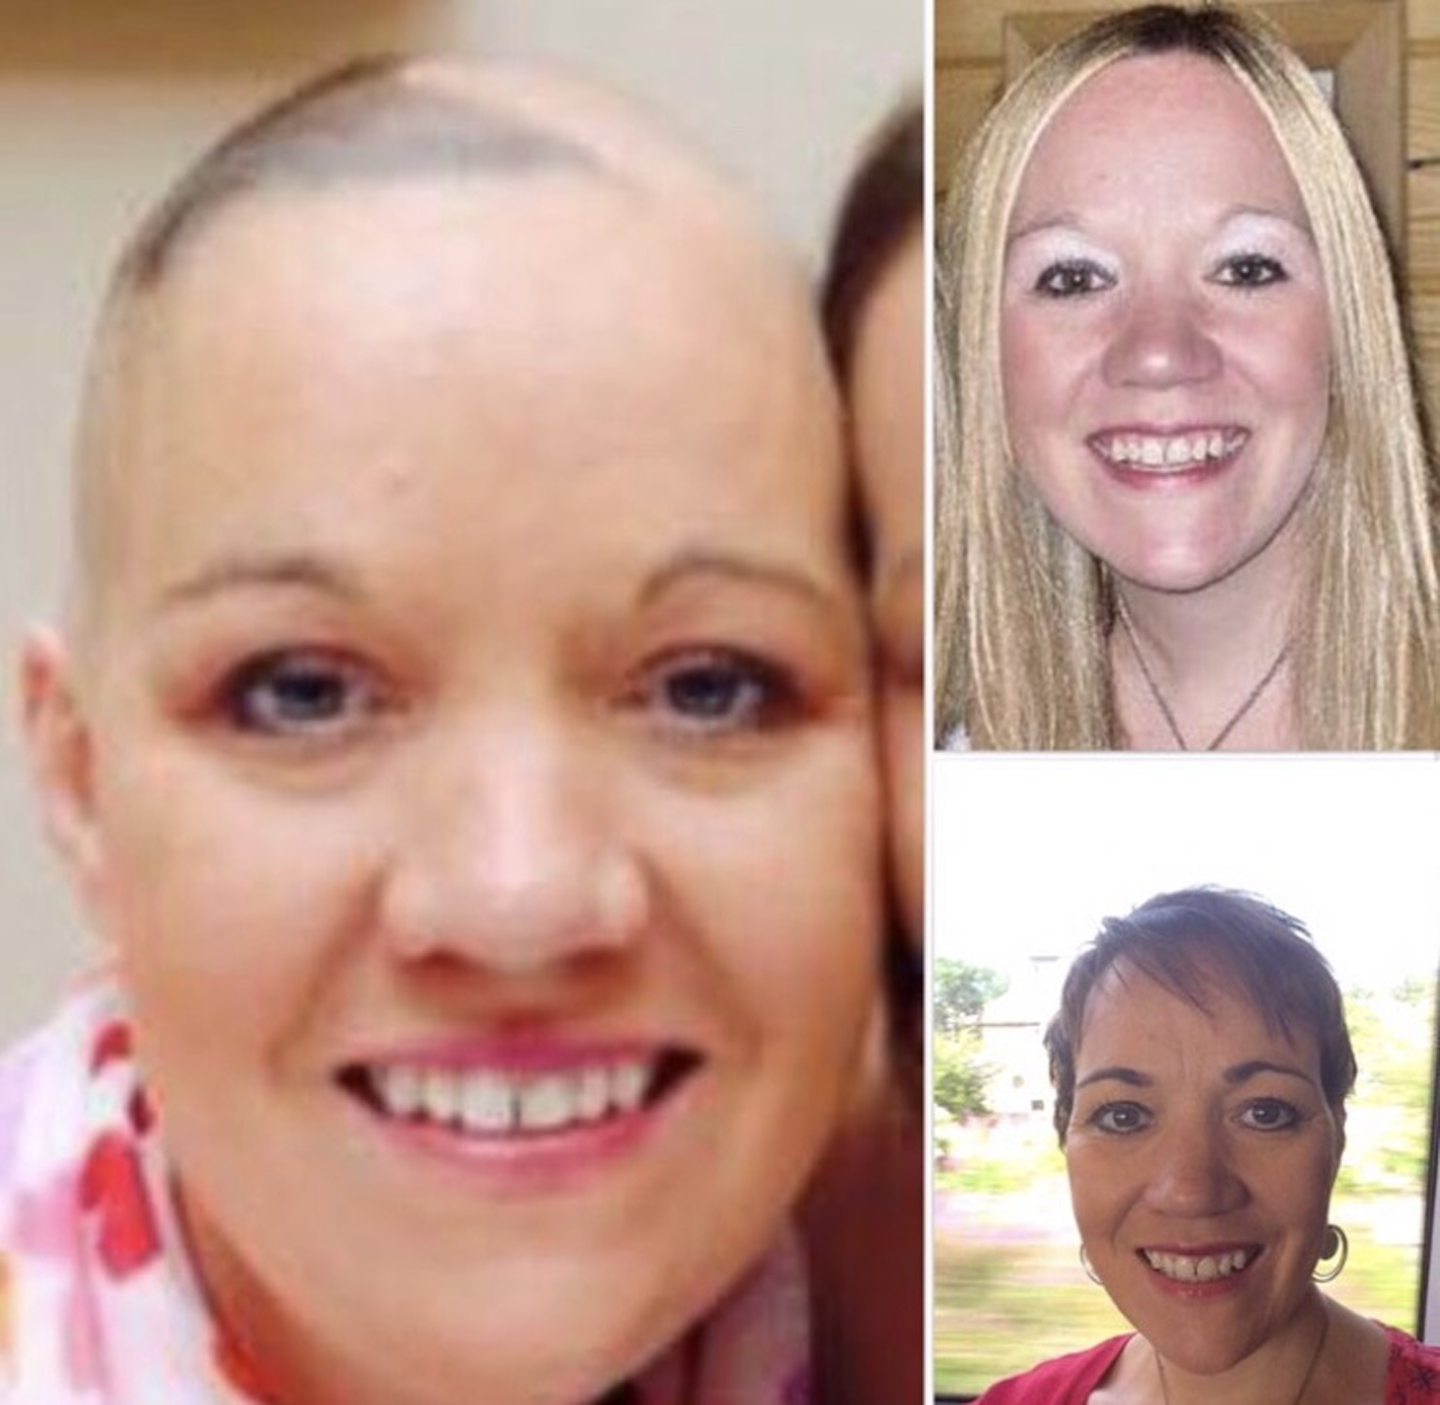 After her operation, Suzanne needed chemotherapy and radiotherapy which caused her to start losing hair - so she shaved the rest off. Image: Suzanne Davies